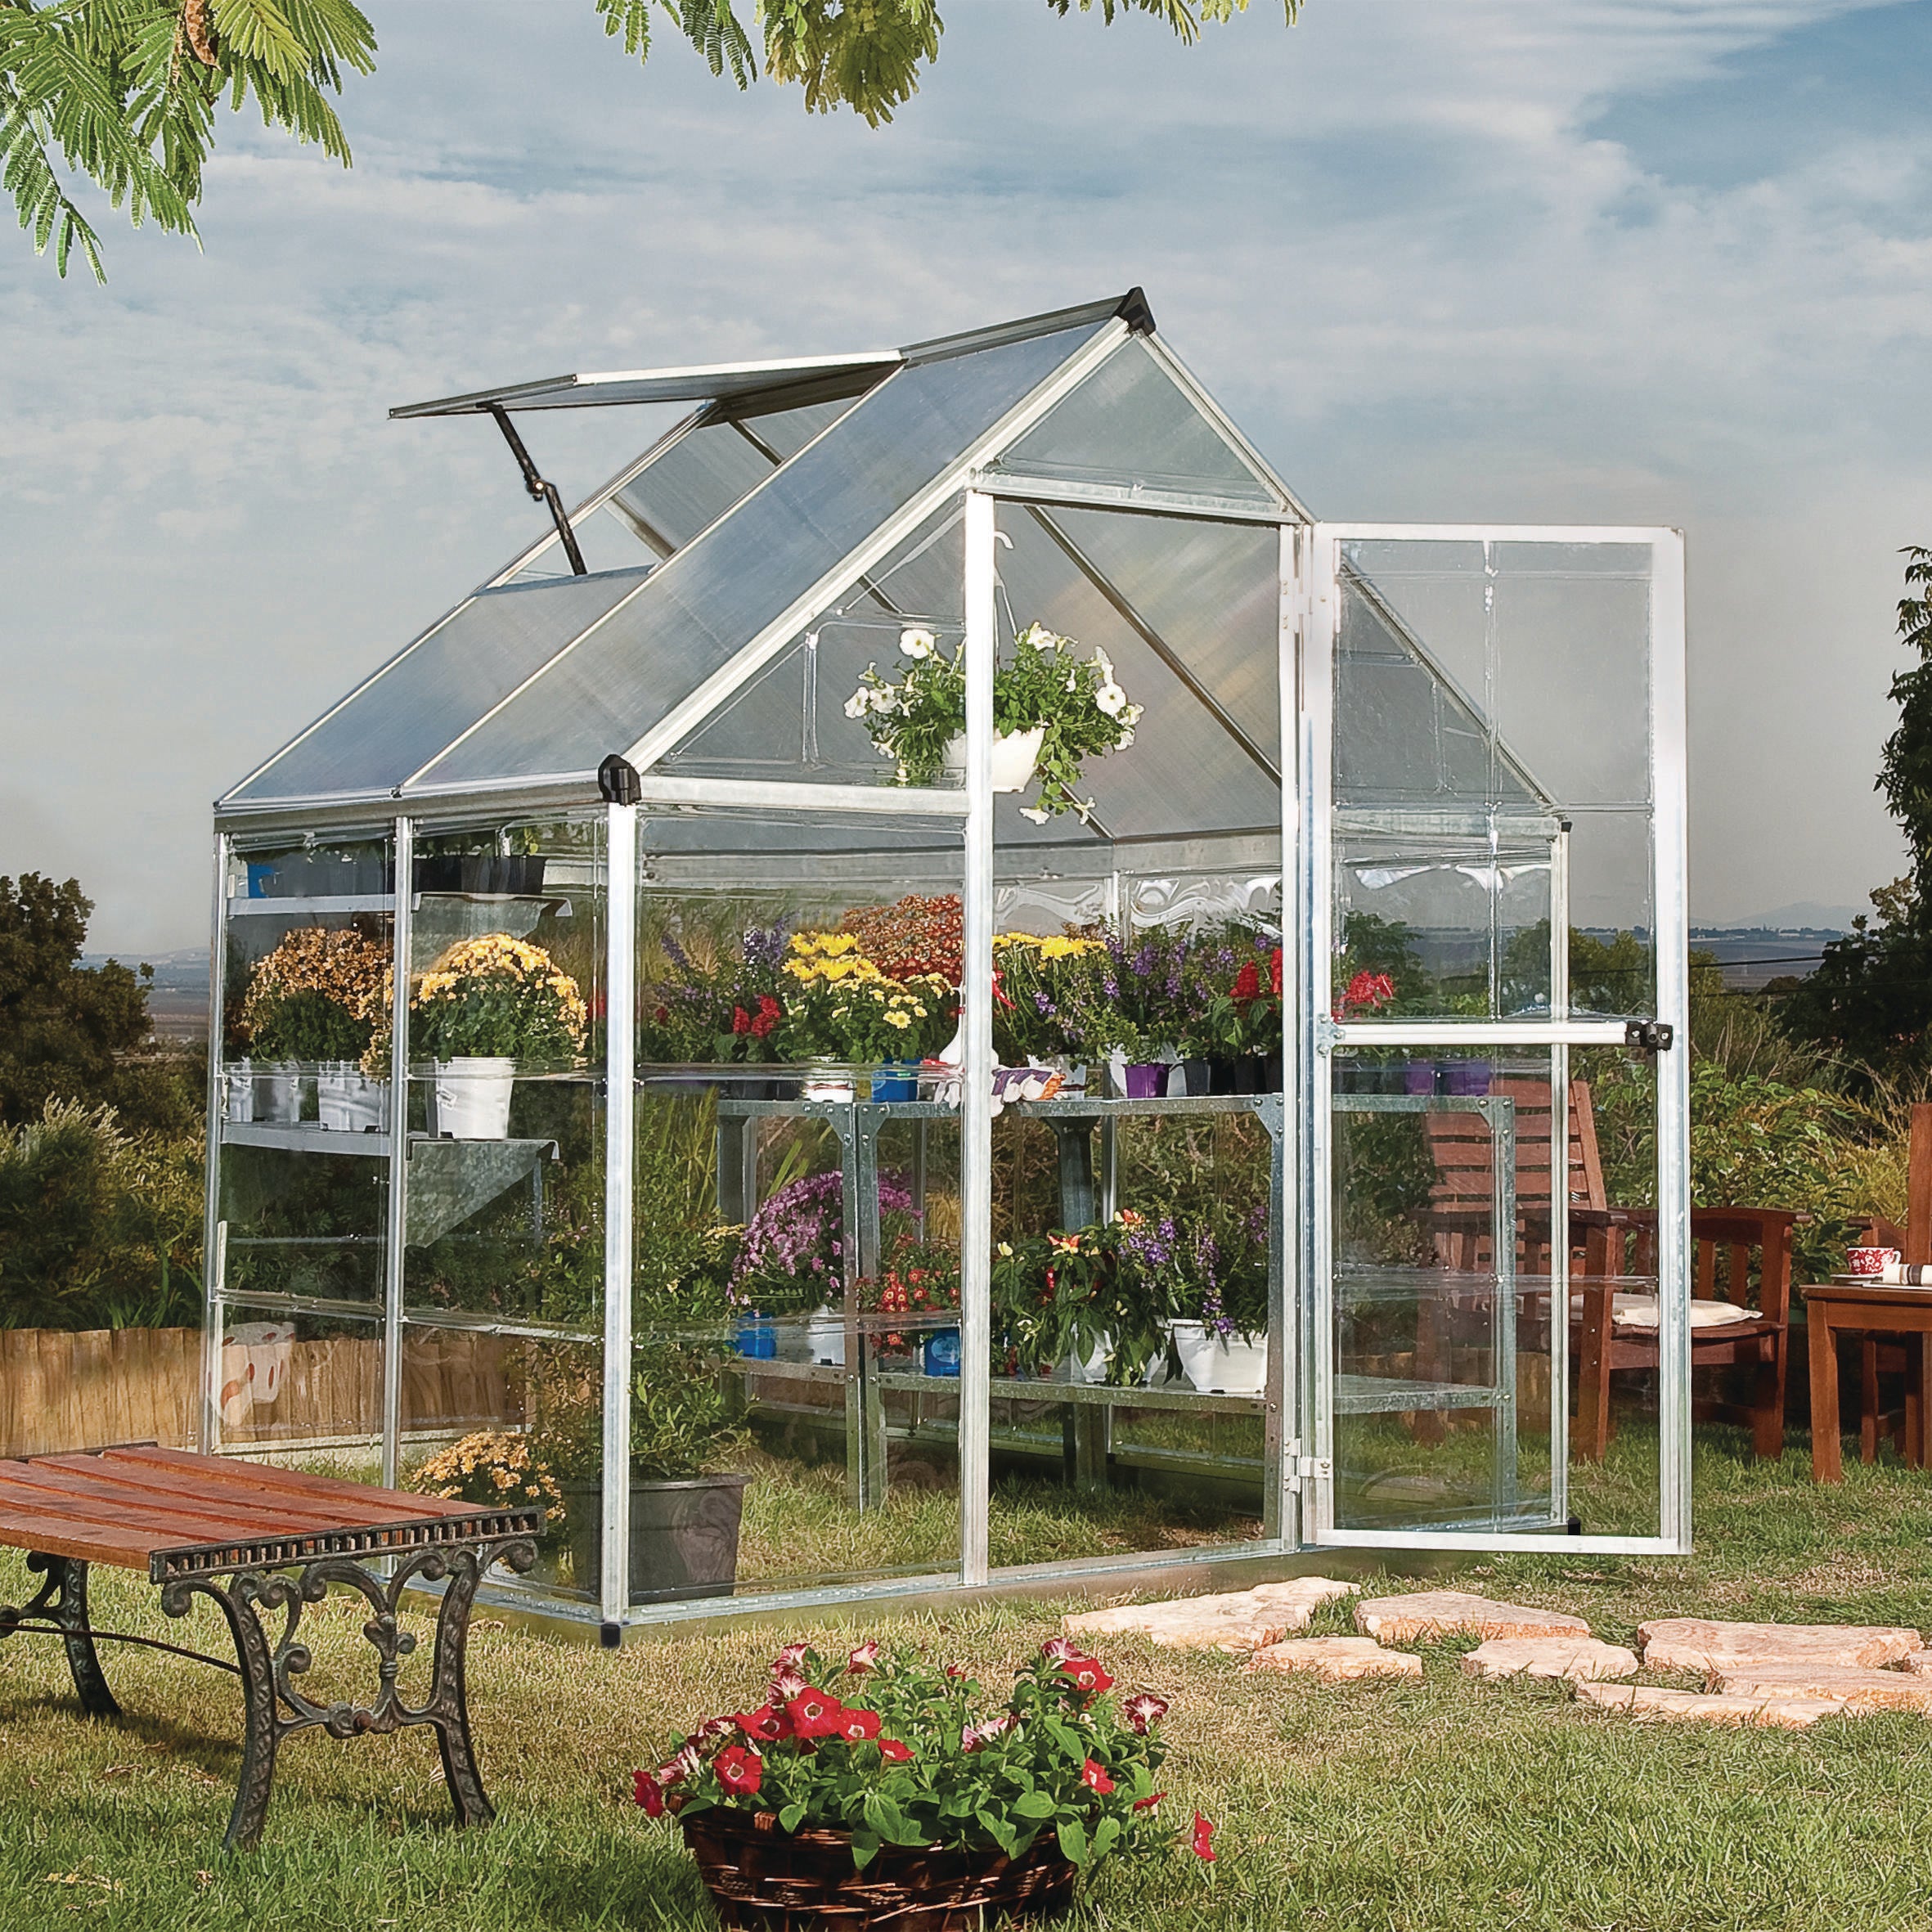 Canopia by Palram 6 x 4 Hybrid Greenhouse Silver